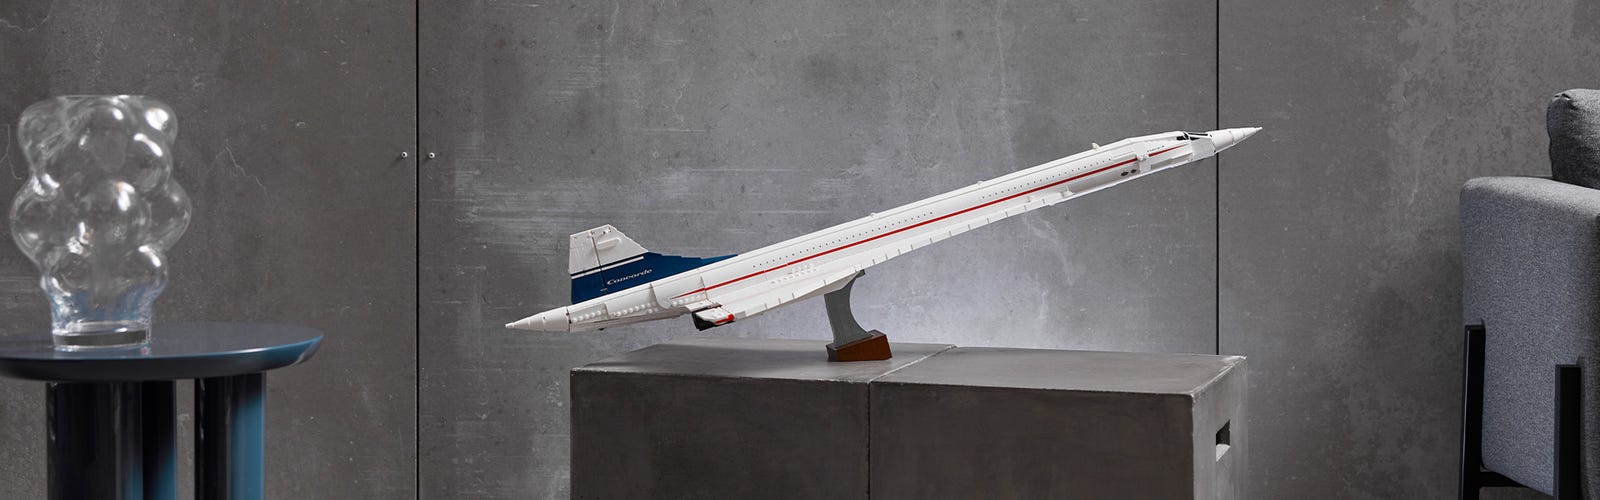 Why the Concorde is an engineering masterpiece | Official LEGO® Shop GR